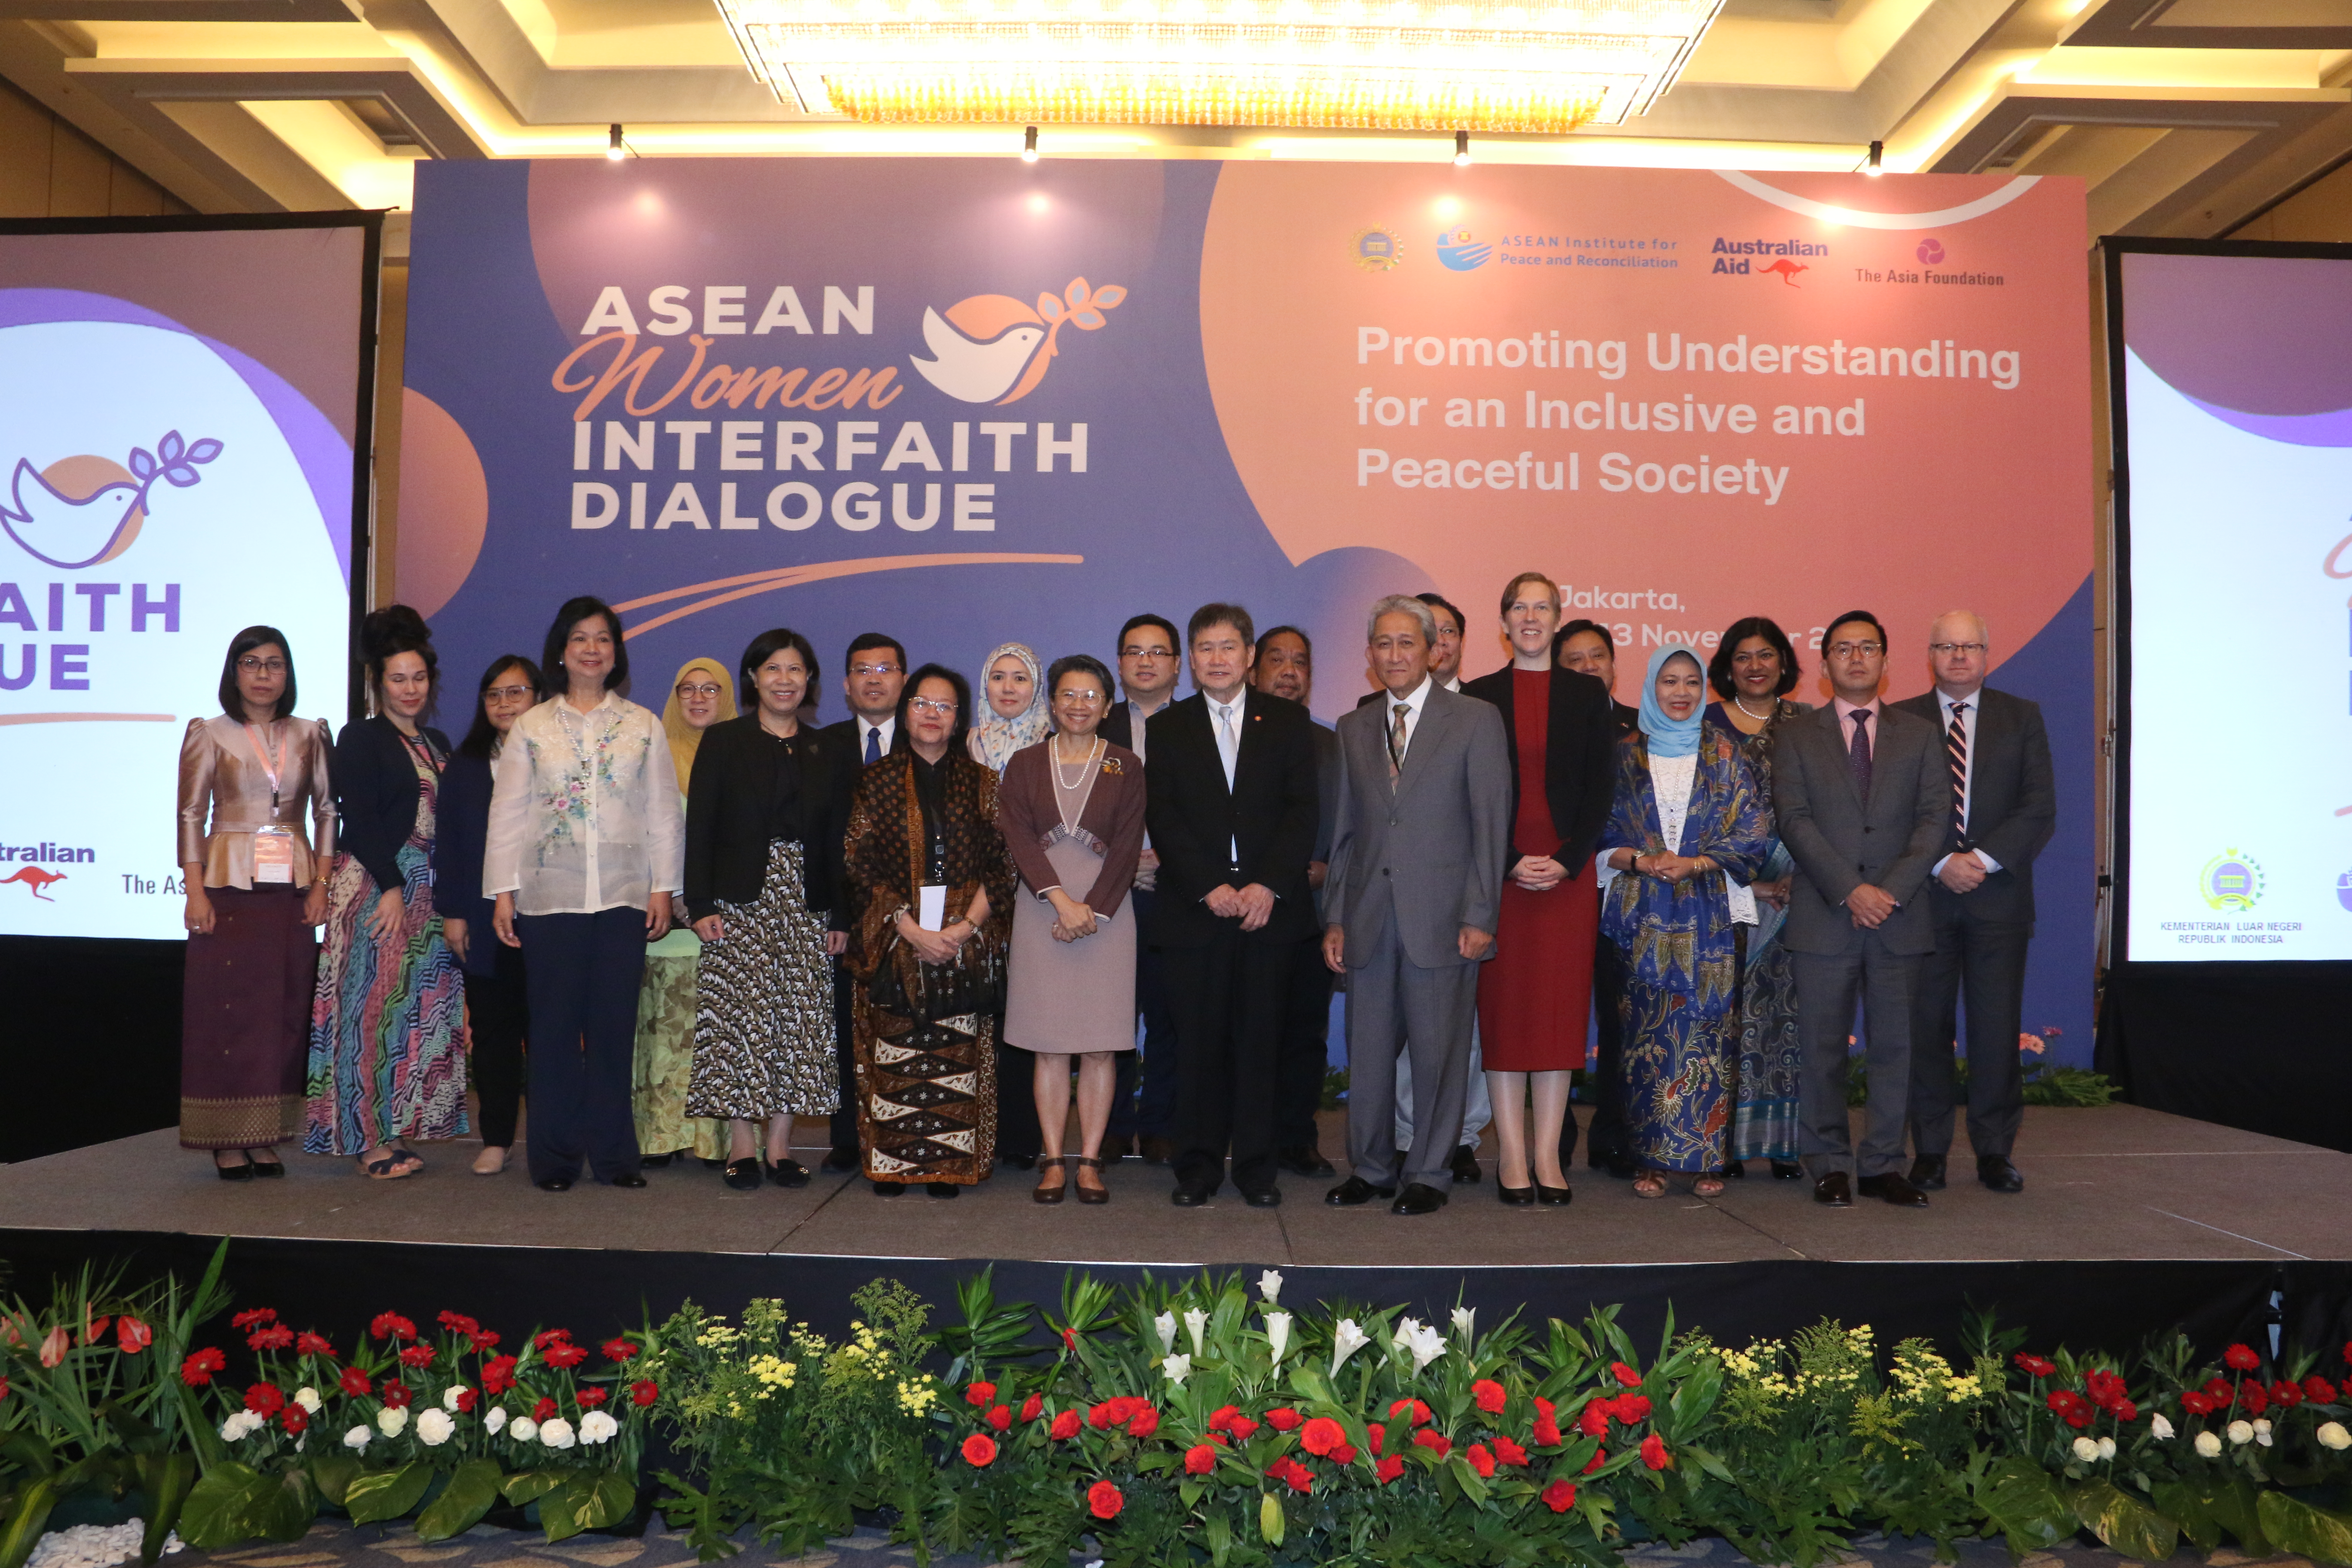 ASEAN Women Interfaith Dialogue: Promoting Understanding for an Inclusive and Peaceful Society